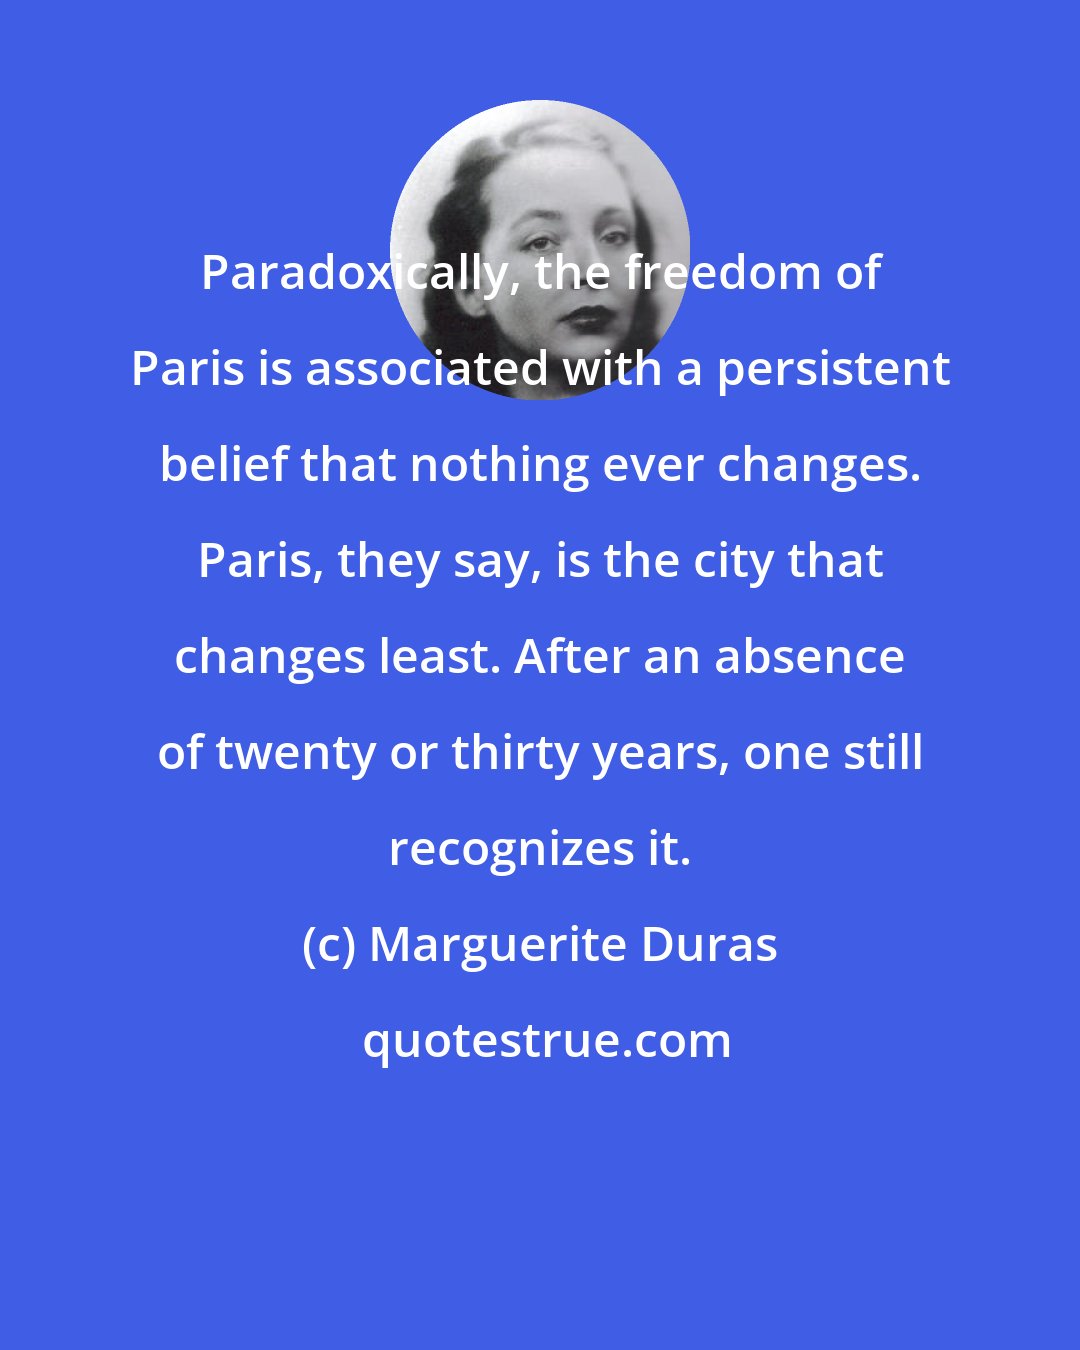 Marguerite Duras: Paradoxically, the freedom of Paris is associated with a persistent belief that nothing ever changes. Paris, they say, is the city that changes least. After an absence of twenty or thirty years, one still recognizes it.